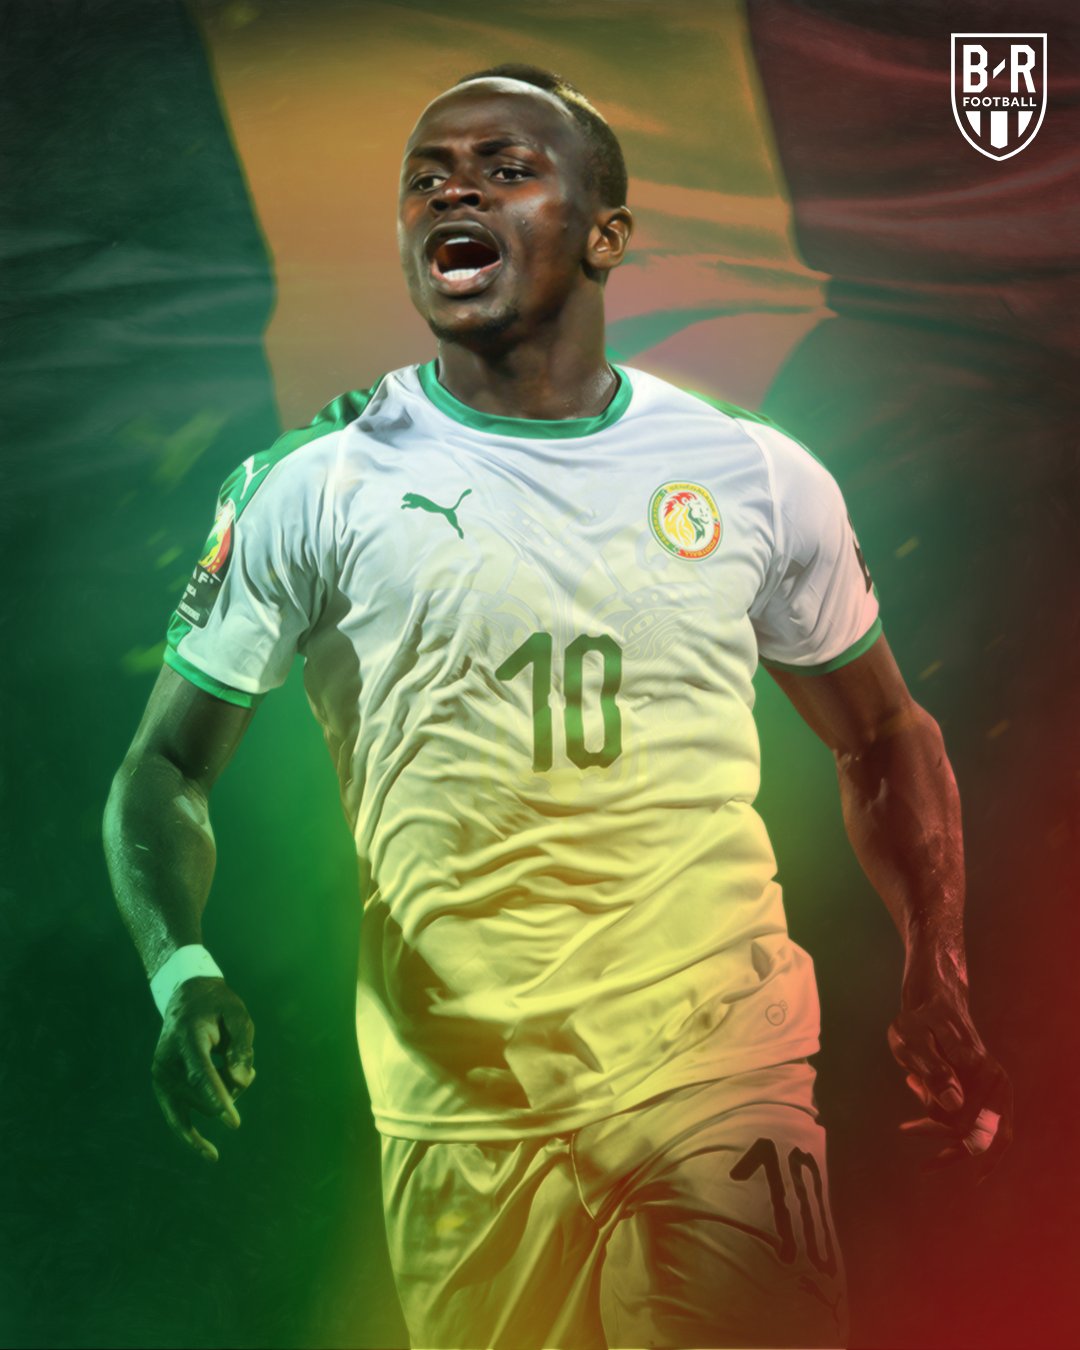 B R Football Mané Scored A 97th Minute Penalty To Win The Game For Senegal. CLUTCH